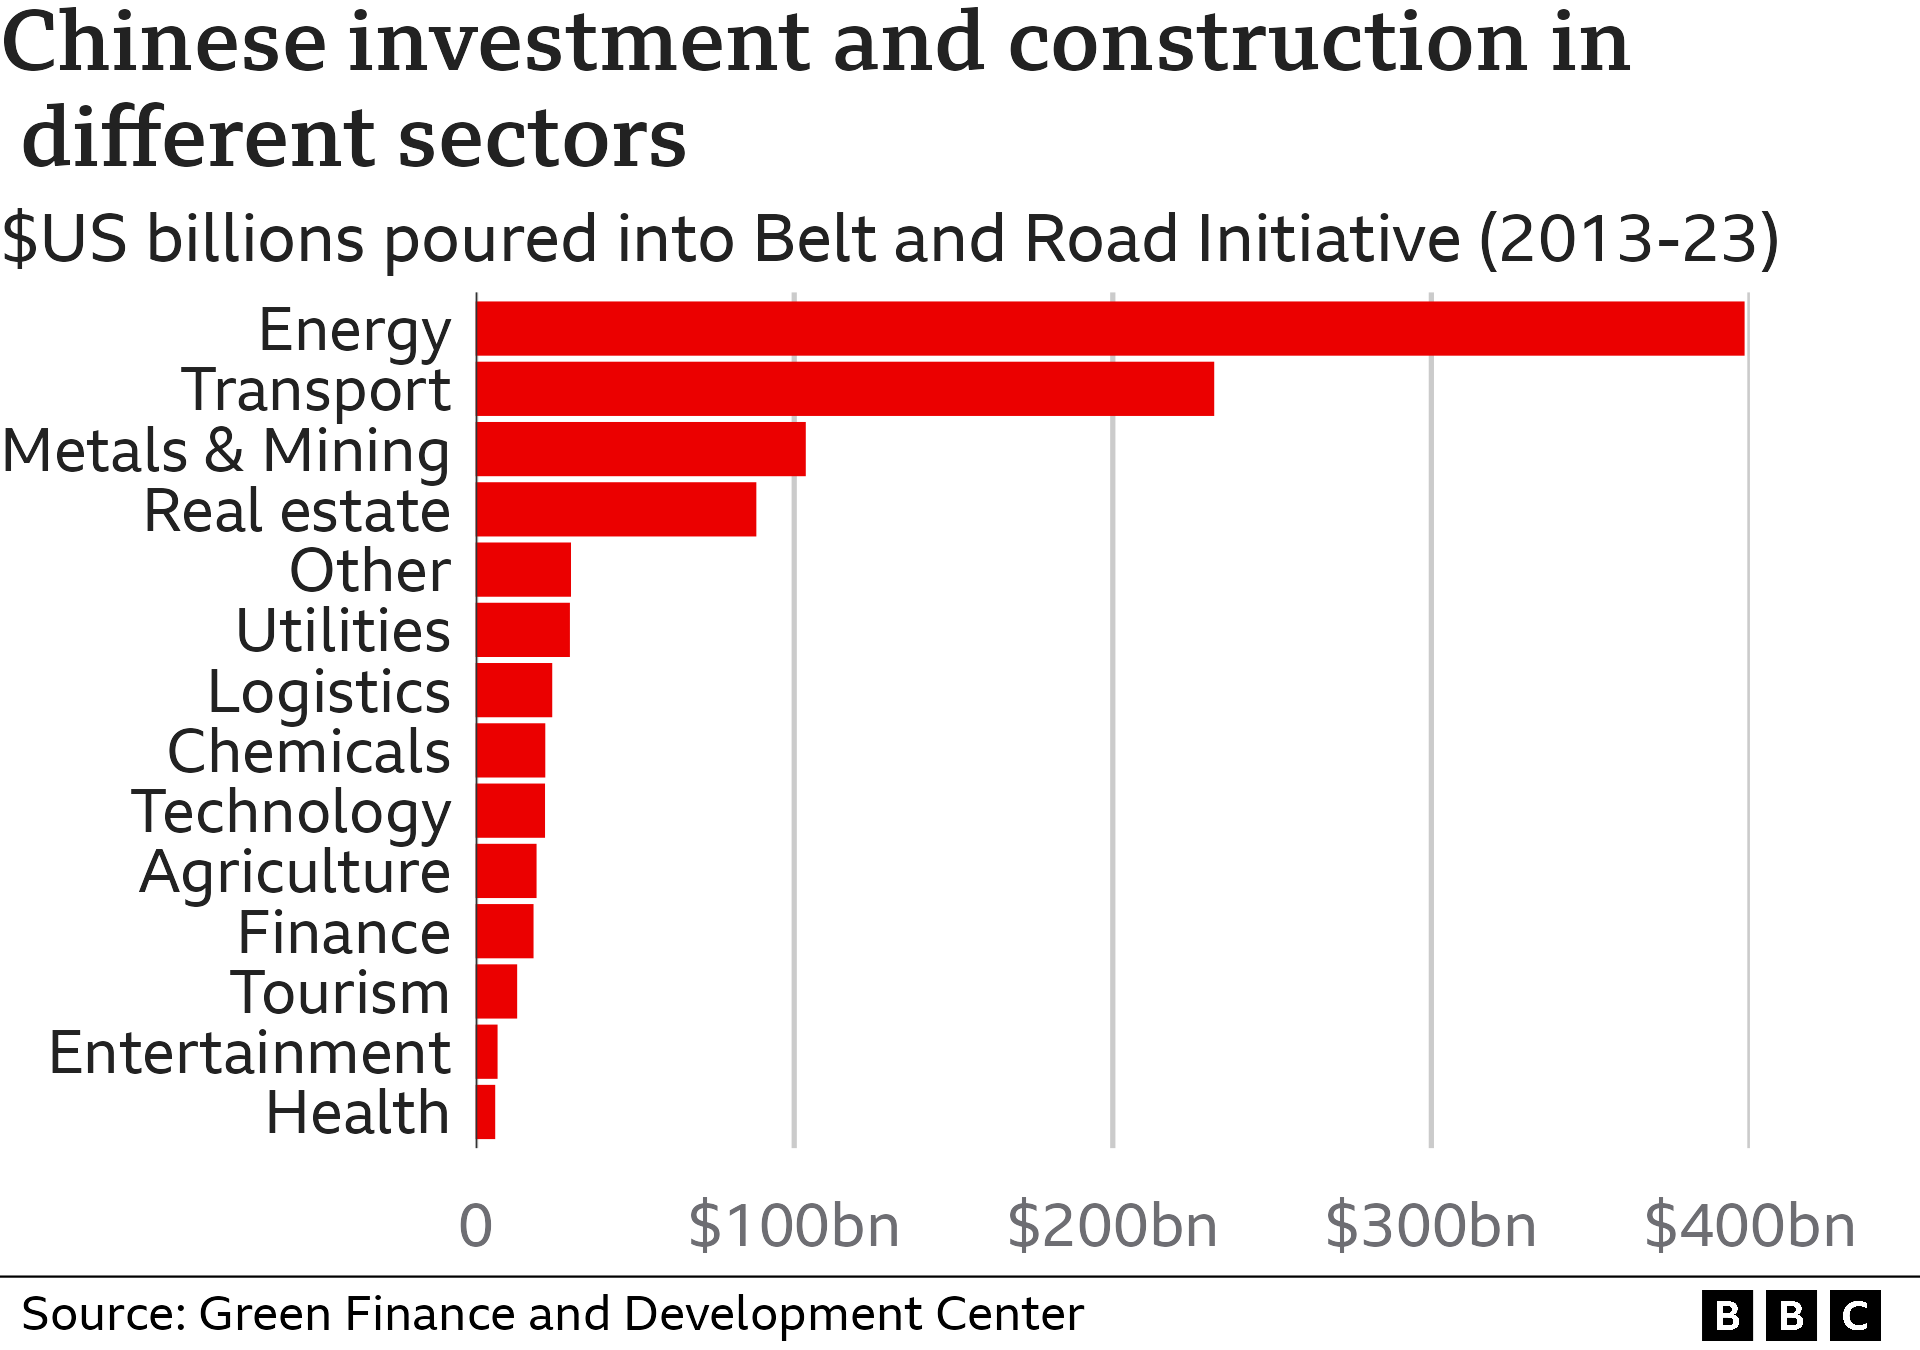 Infographic showing Chinese BRI investment and construction in different sectors